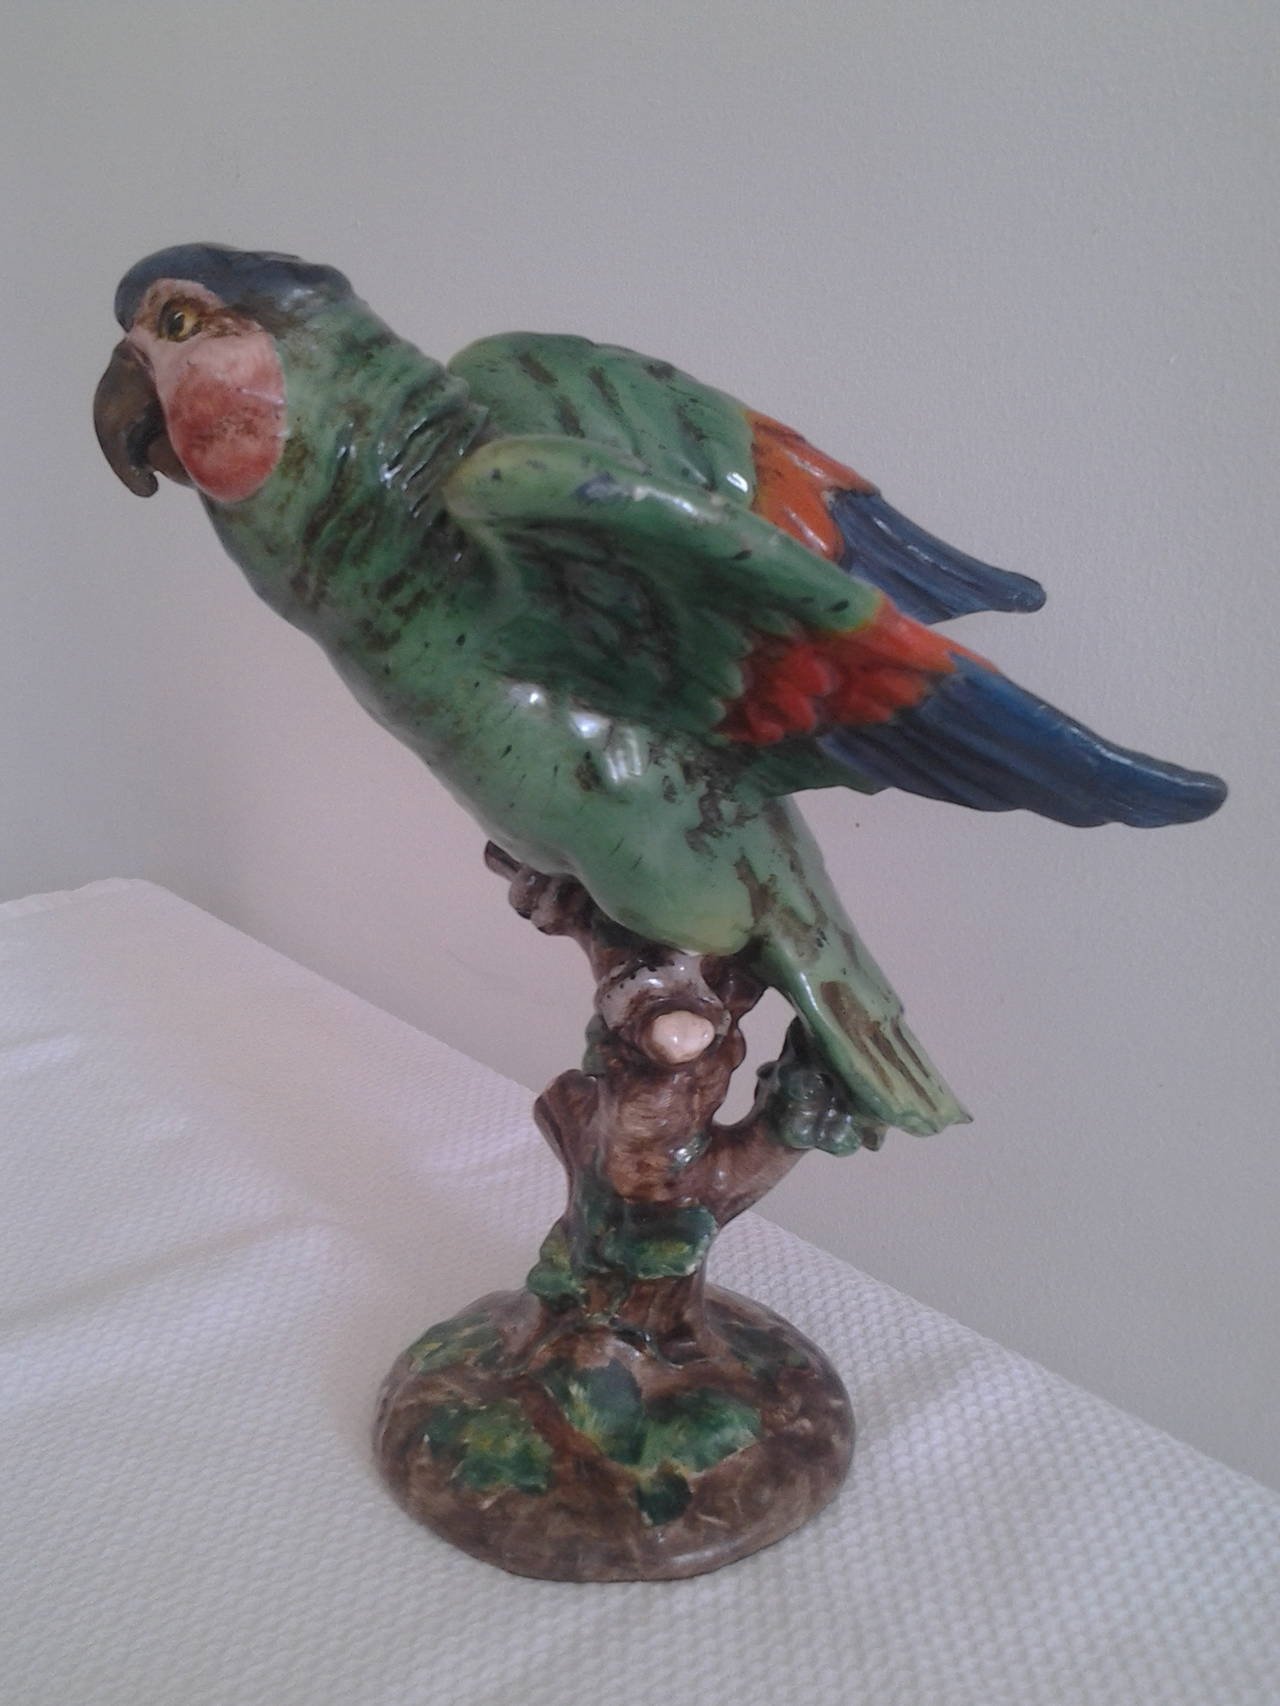 Ceramic parrot by Ugo Zaccagnini & Figli. The factory was founded in 1905, in Sesto Fiorentino, in 1912 they move the factory to Florence. Many sculptors and painters have collaborated with the factory, such as Contini, Martini and Ciardella.